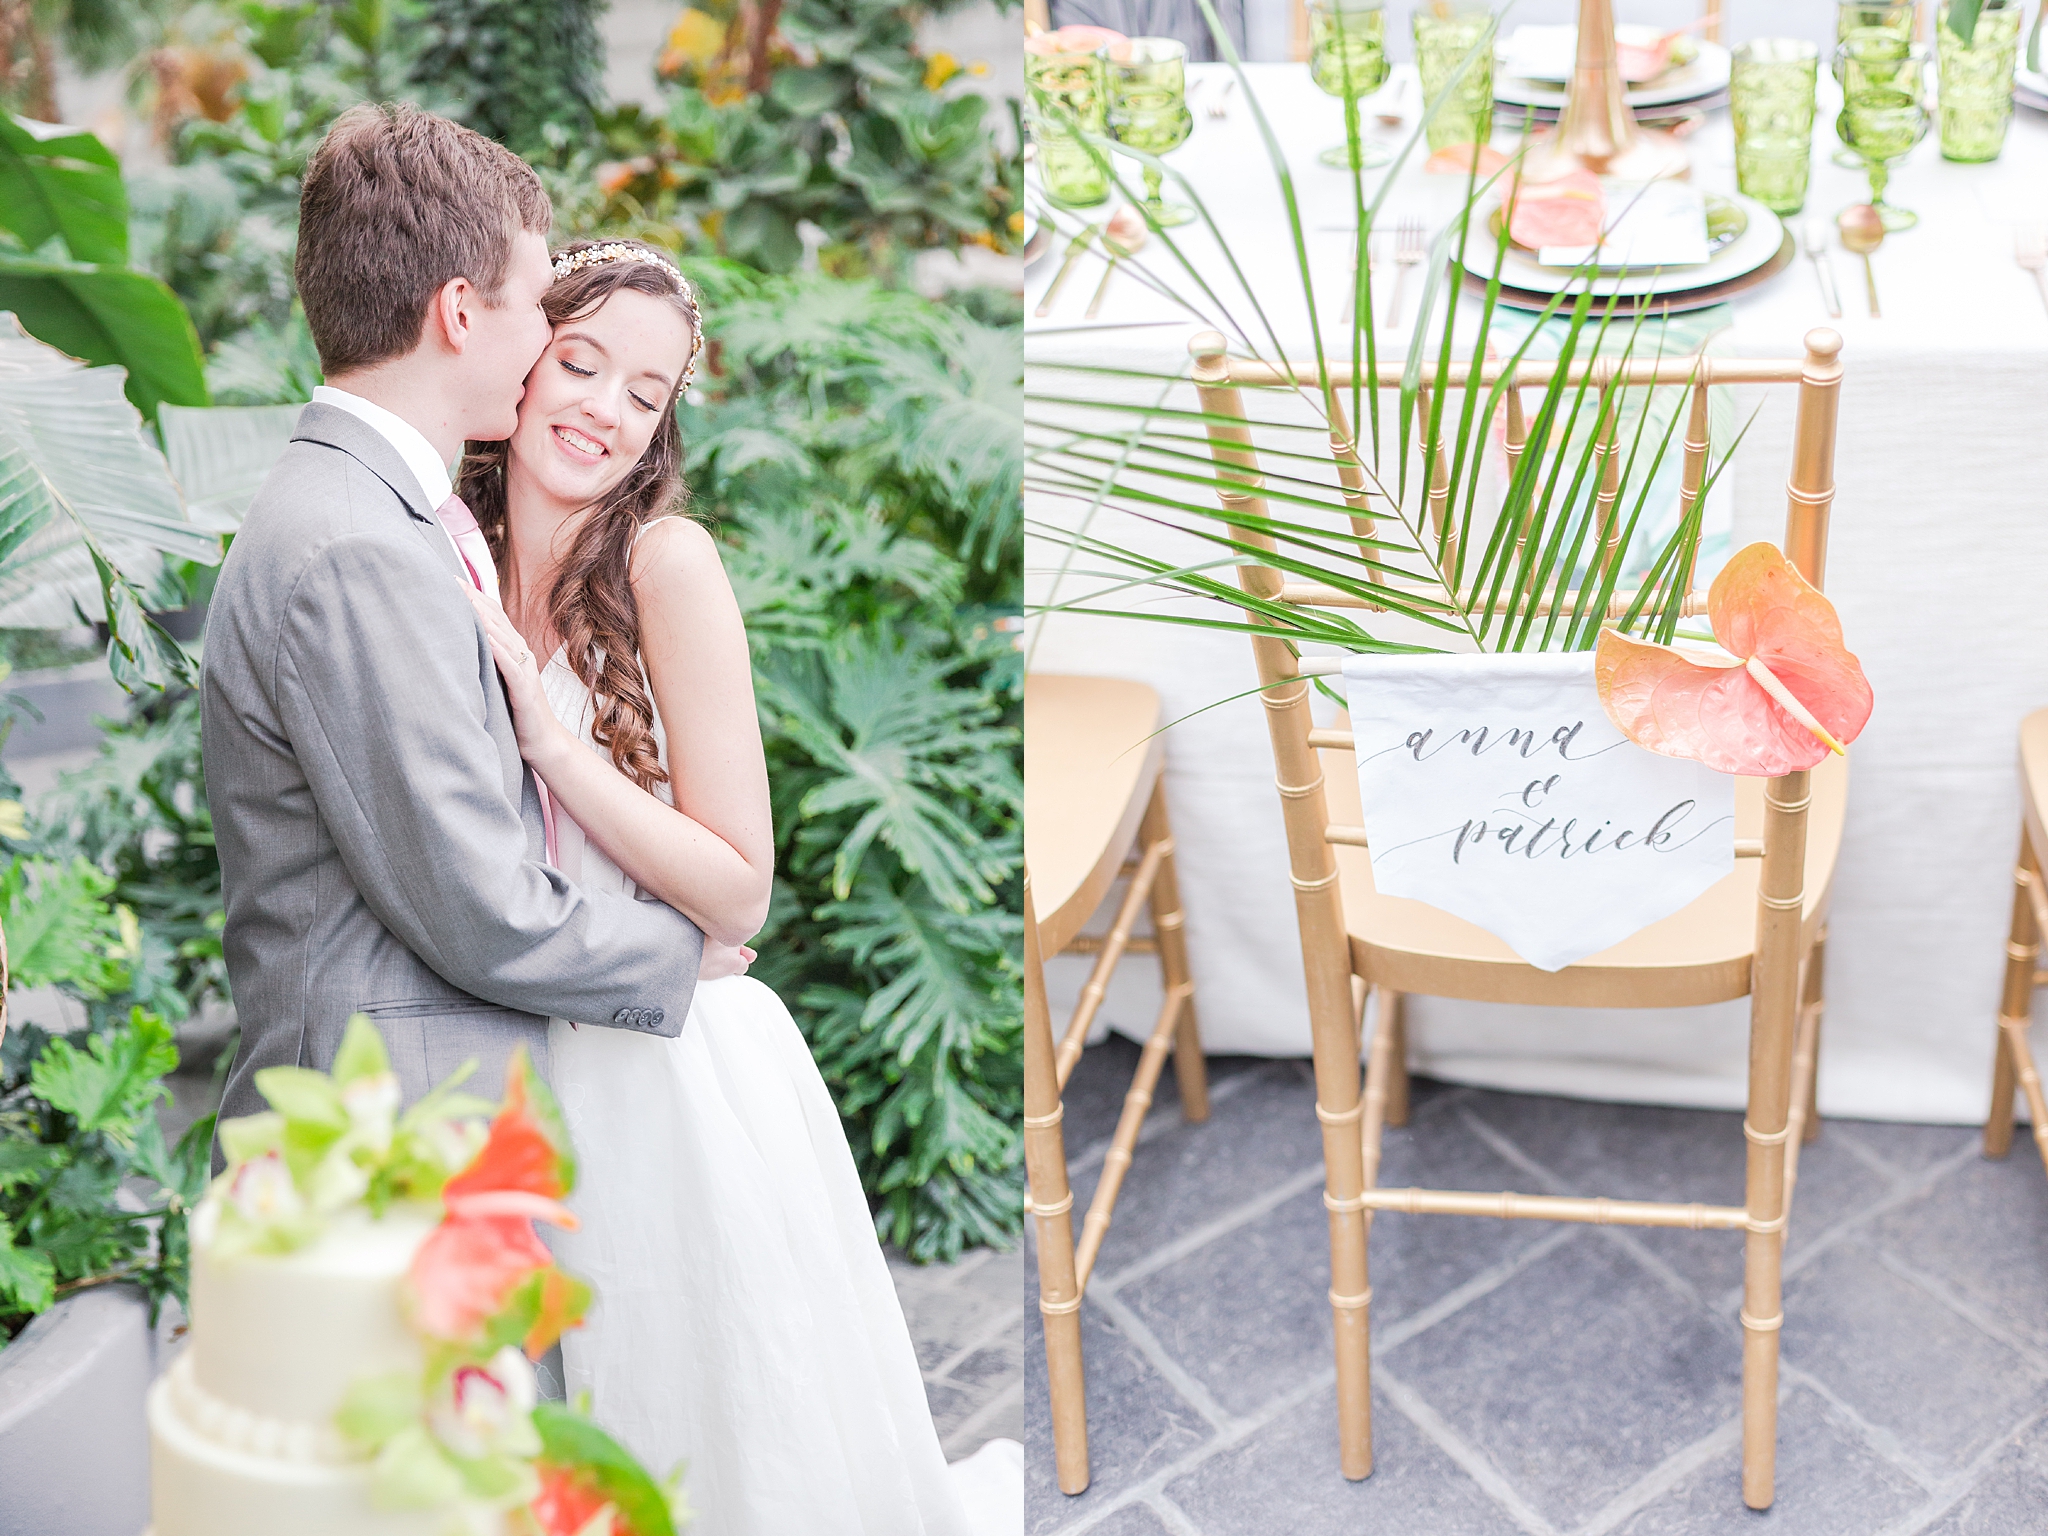 colorful-tropical-wedding-photos-at-the-crystal-gardens-in-chicago-illinois-by-courtney-carolyn-photography_0045.jpg